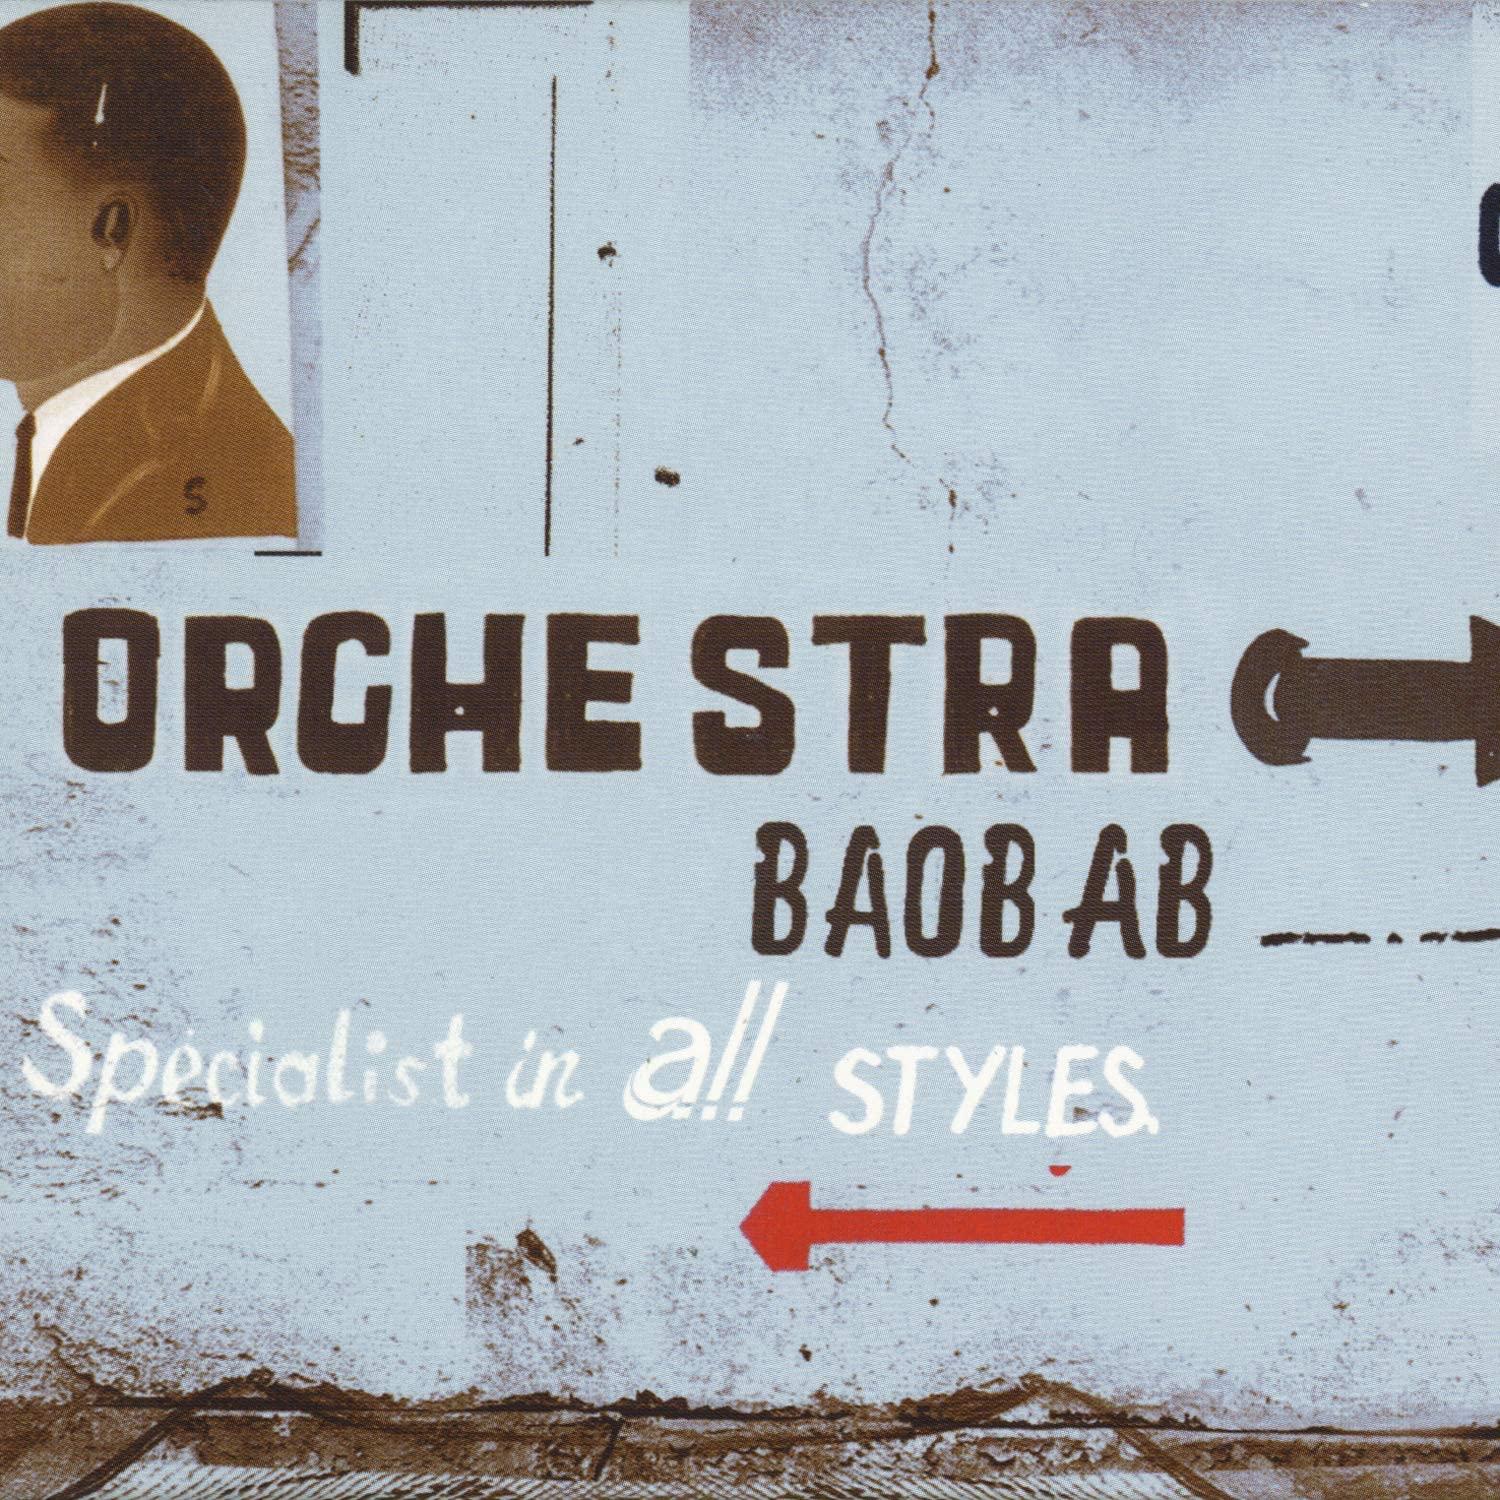 Orchestra Baobab - Specialist in All Styles (2002) 2LP